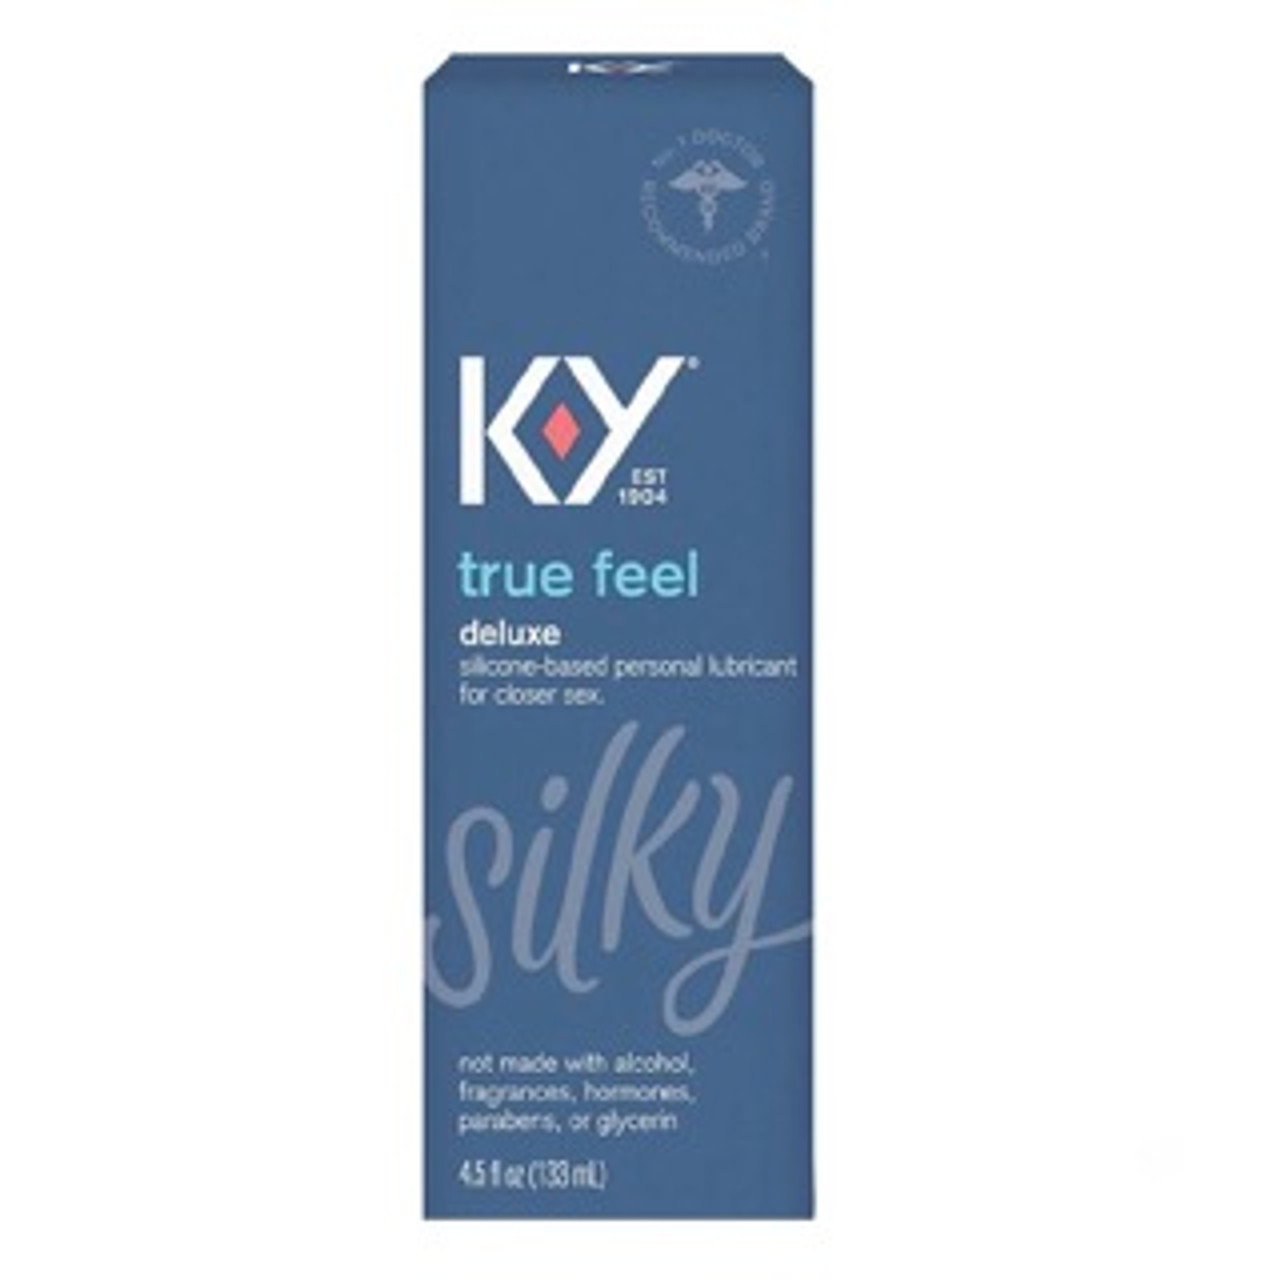 Buy KY True Feel Silicone Based Personal Lubricant Online | CondomsFast